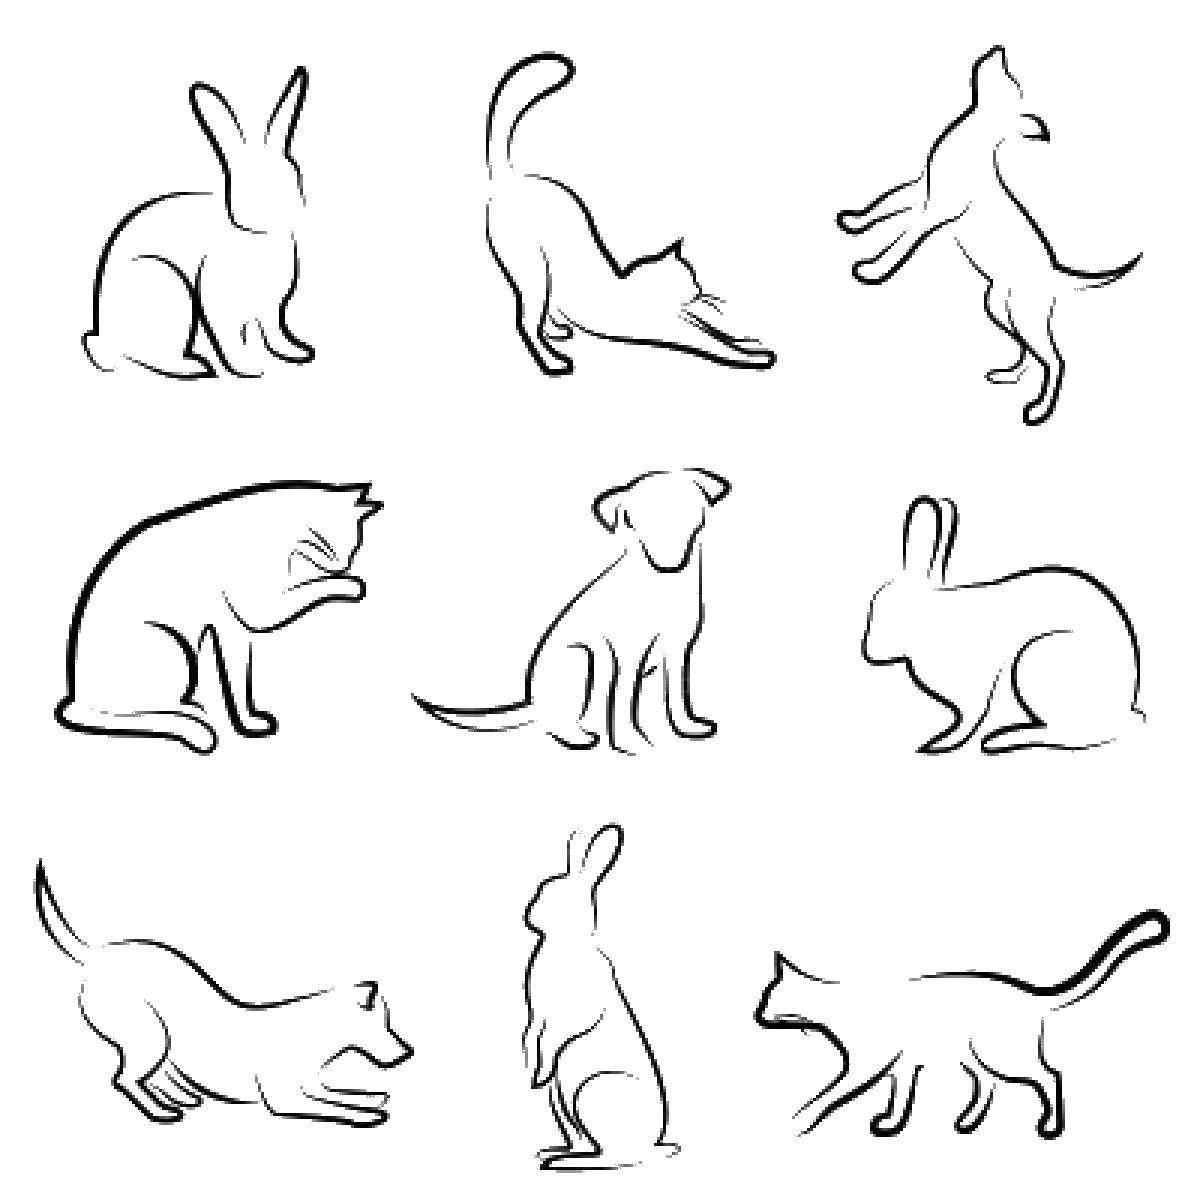 Coloring Different animals. Category the rabbit. Tags:  rabbit, cat, dog.